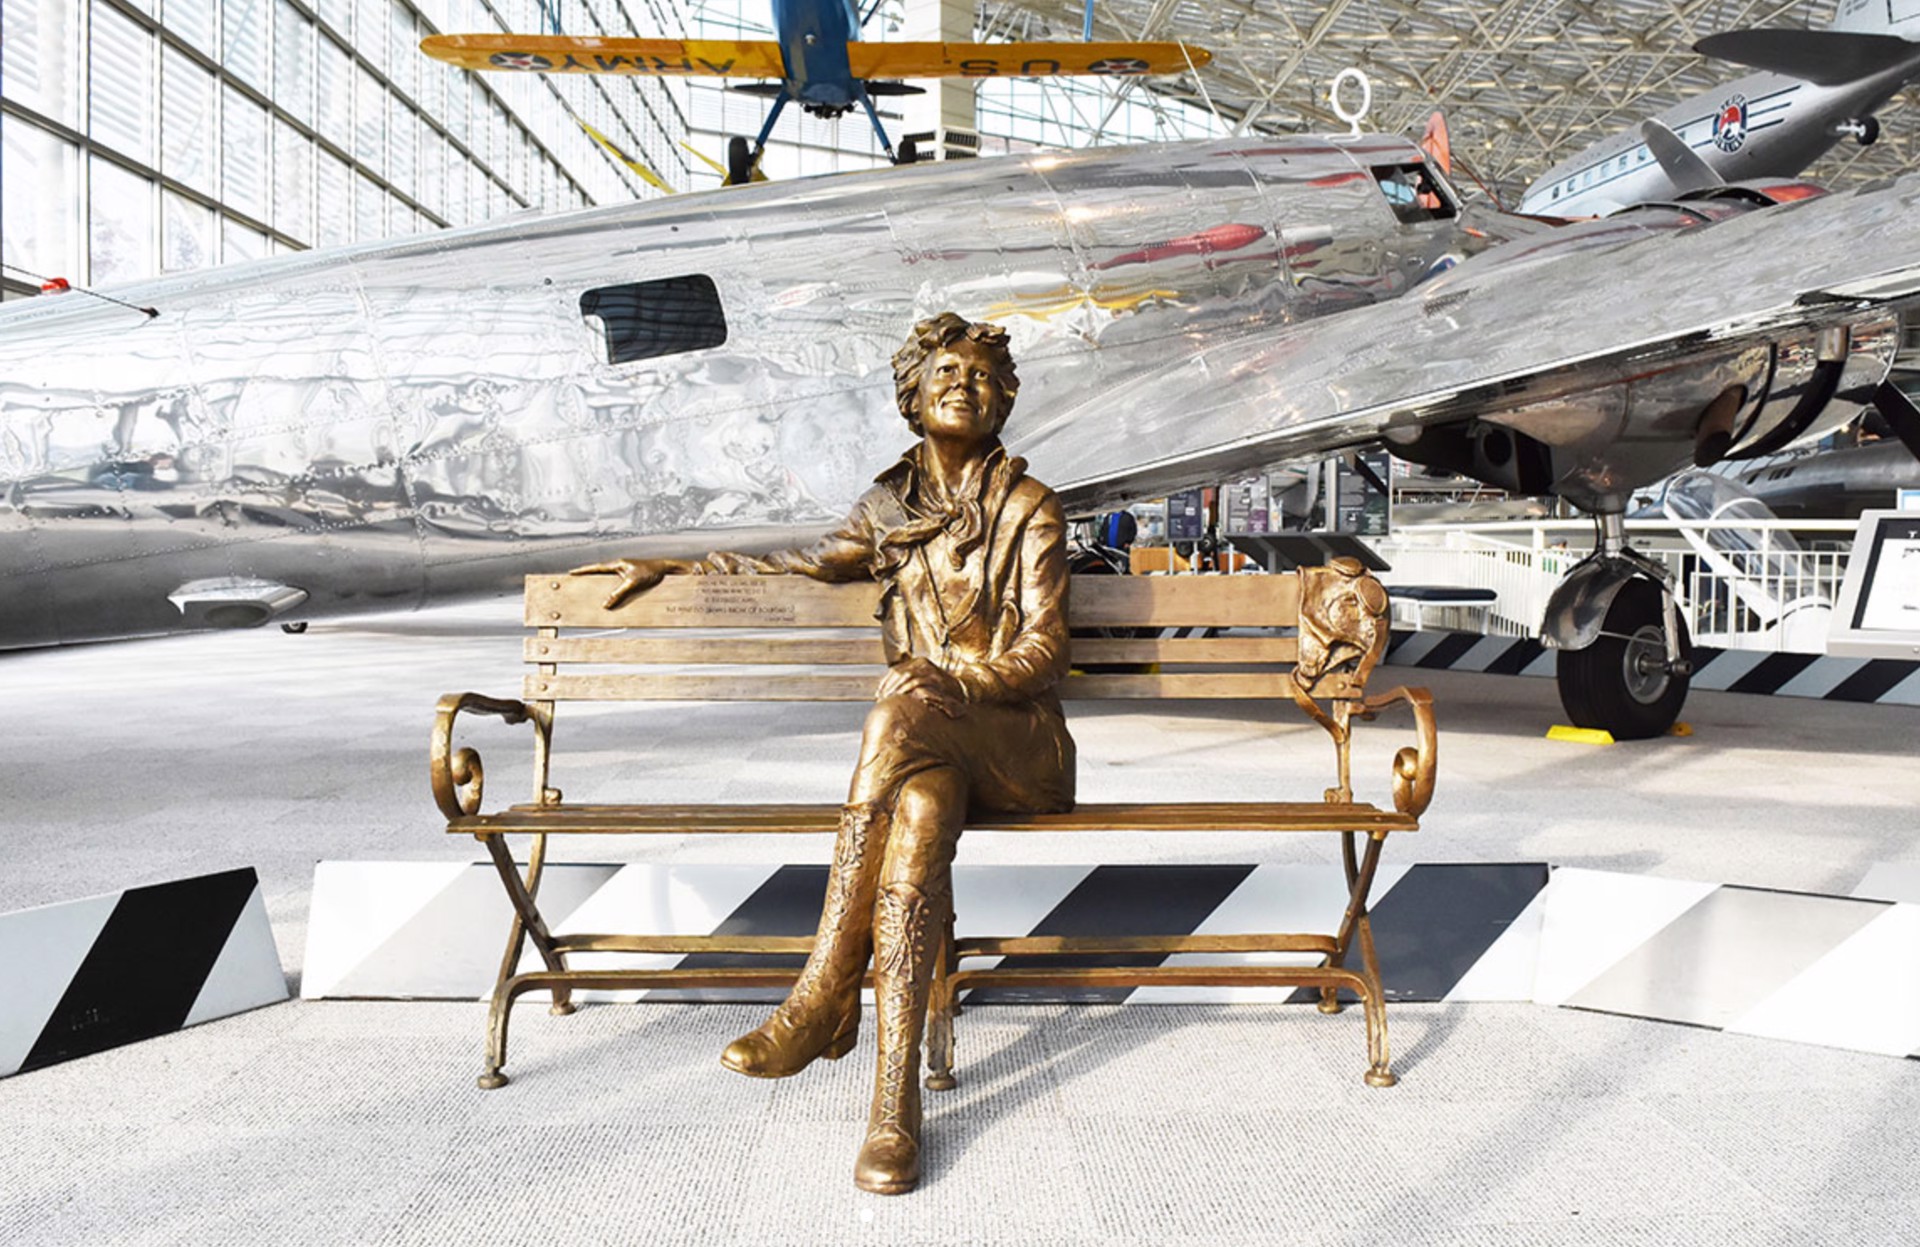 Amelia Earhart Bench by Gary Lee Price (sculptor)